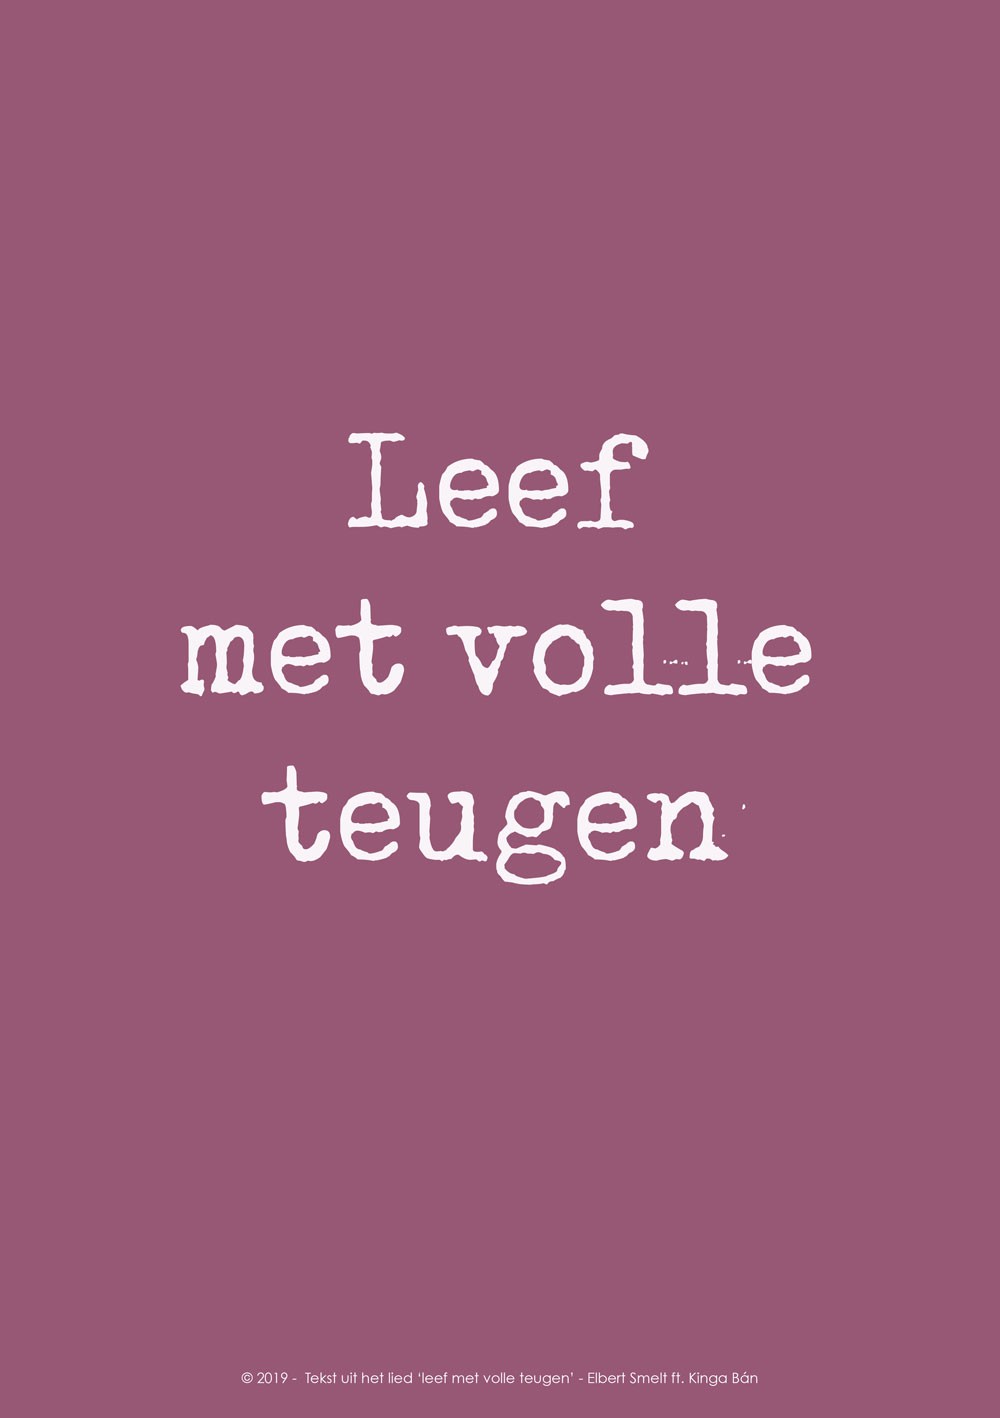 Poster A4 'Leef met volle teugen - roze' - MA33529 -  Posters A4 bij MajesticAlly